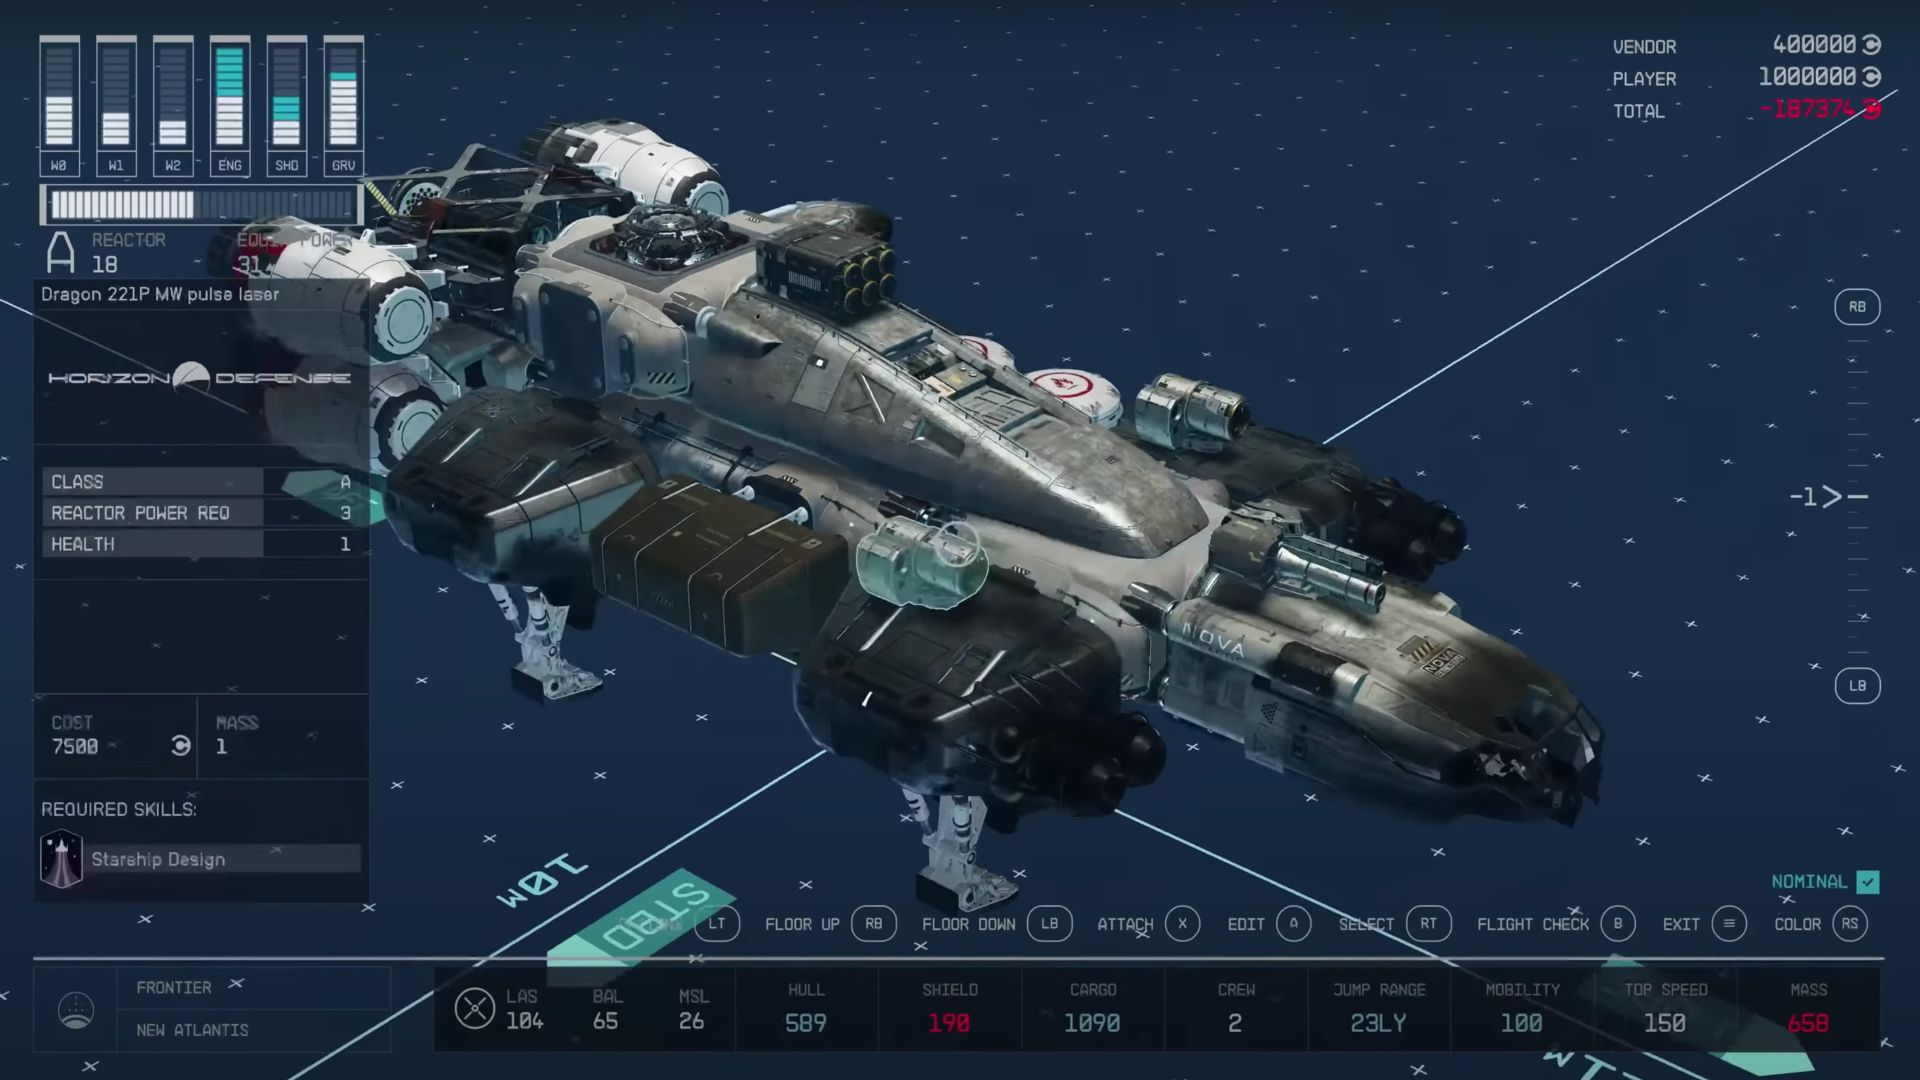 Starfield Ship Customization: The Lasers can be seen